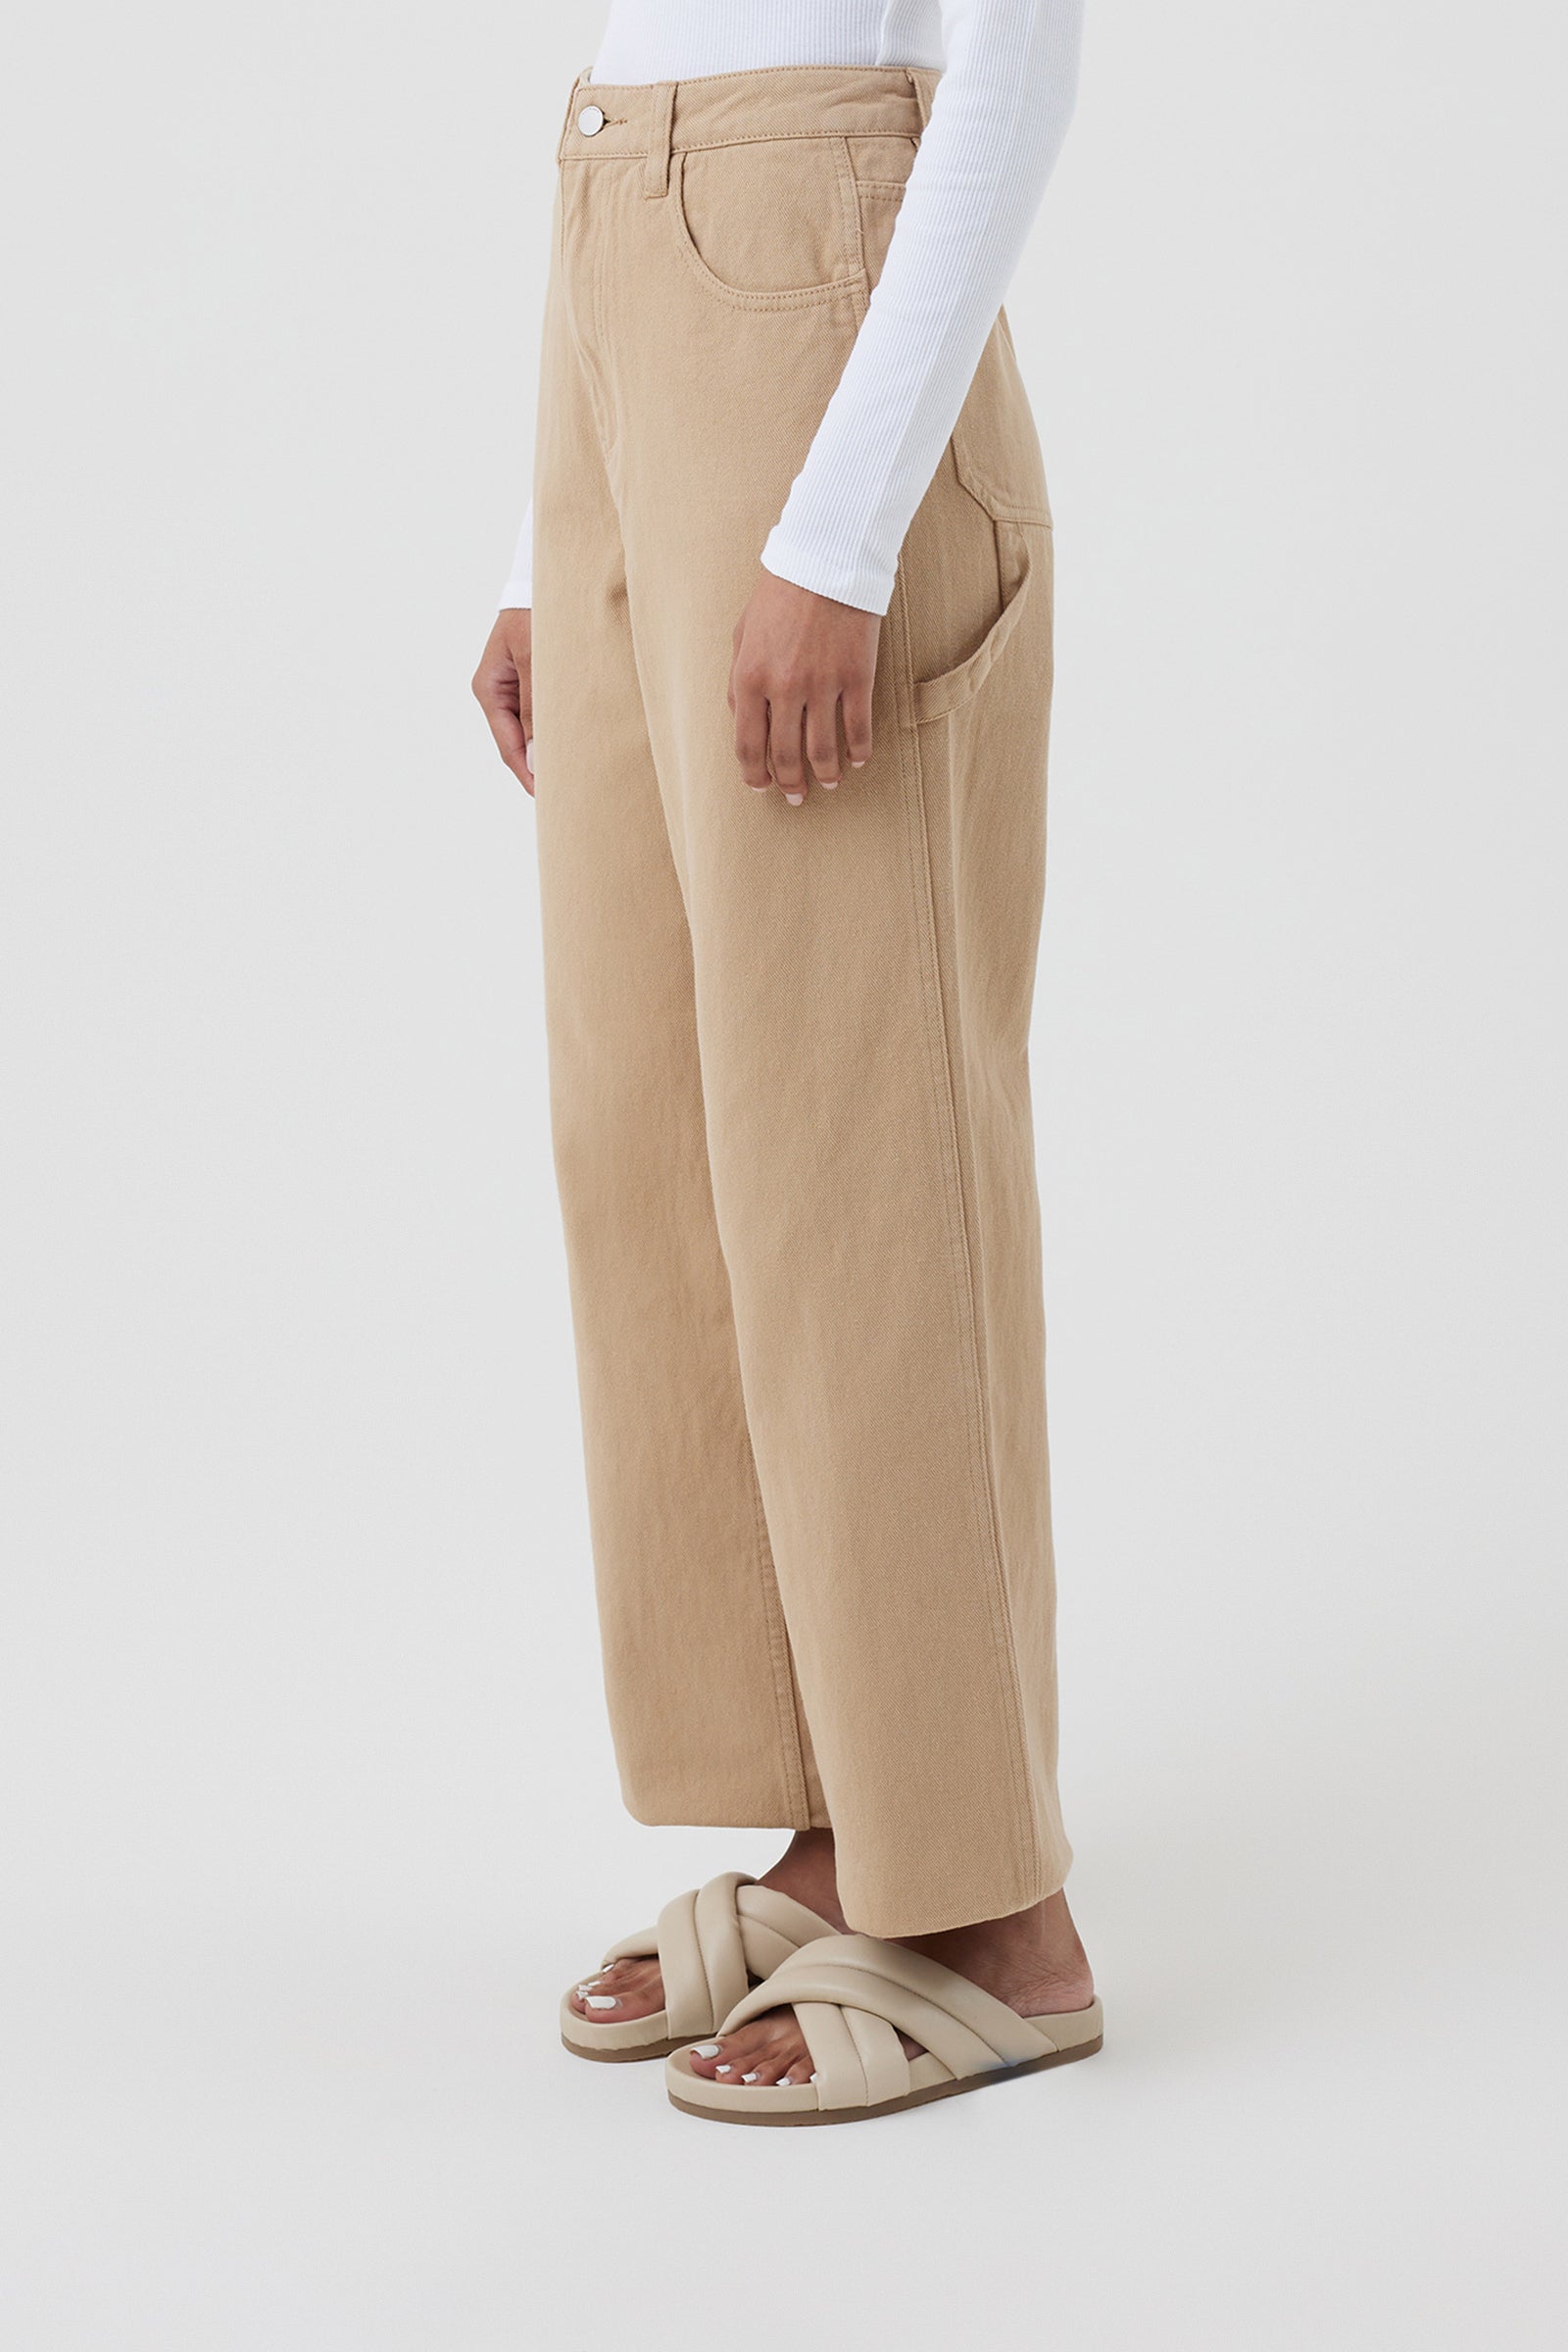 Nude Lucy Noa Carpenter Pant In a Light Brown Biscuit Colour